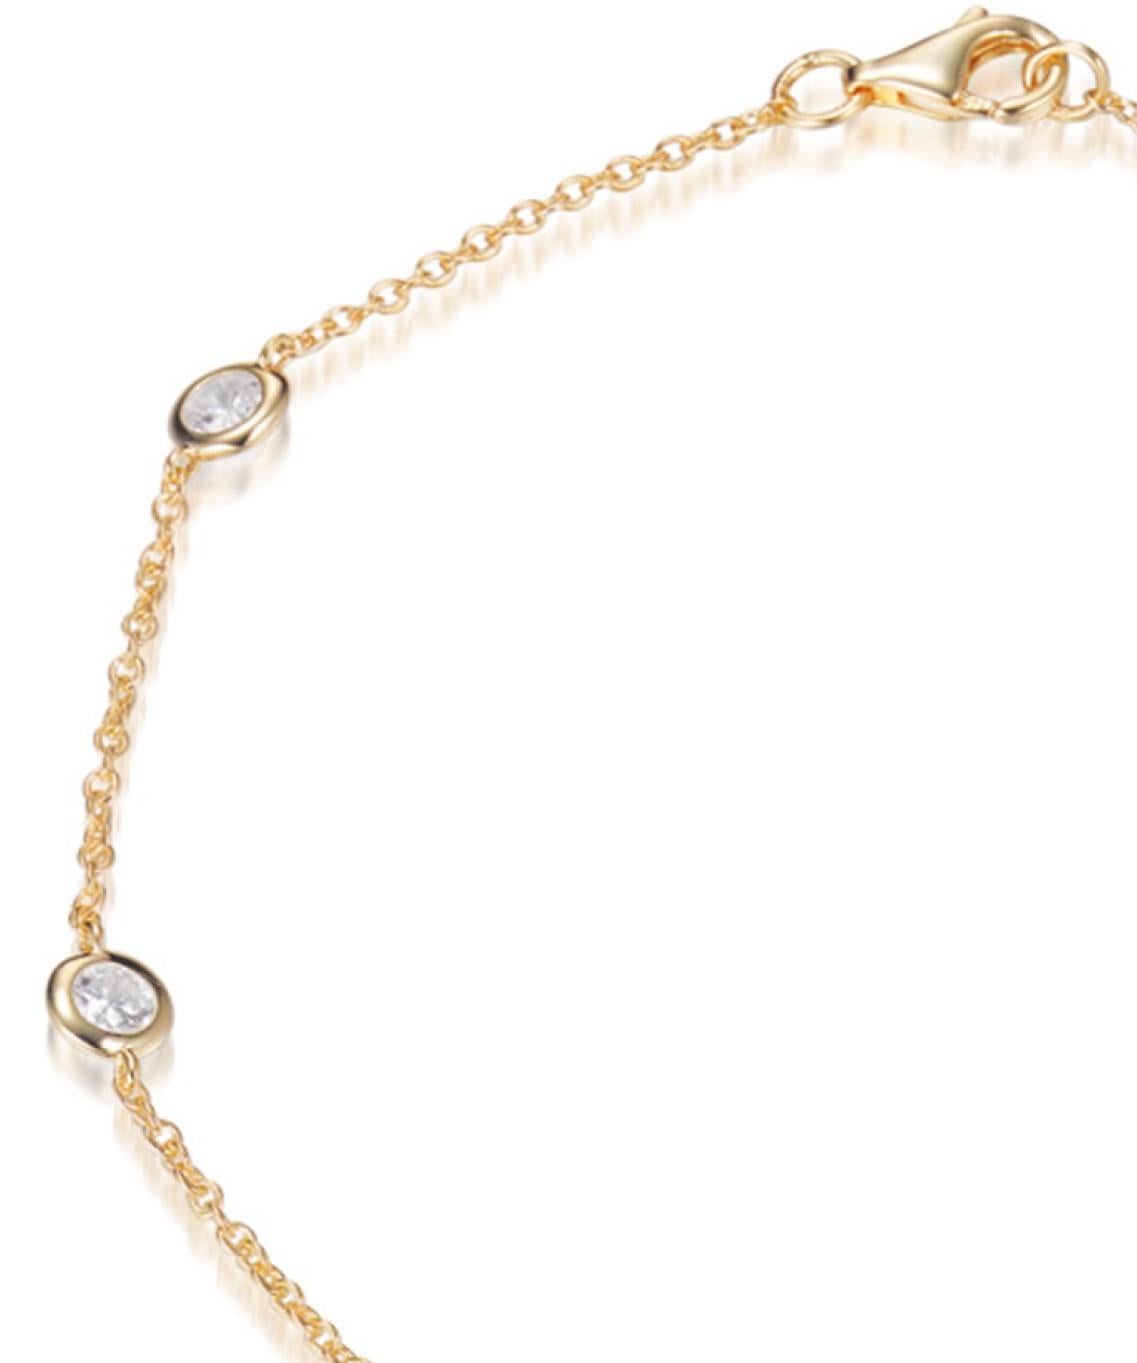 This design will never go out of style. Extremely wearable day or evening.

Wear alone or layer with our 14 karat rose gold and silver brilliant cut chain bracelets for a truly stunning effect.

Featuring five round brilliant cut cubic zirconia